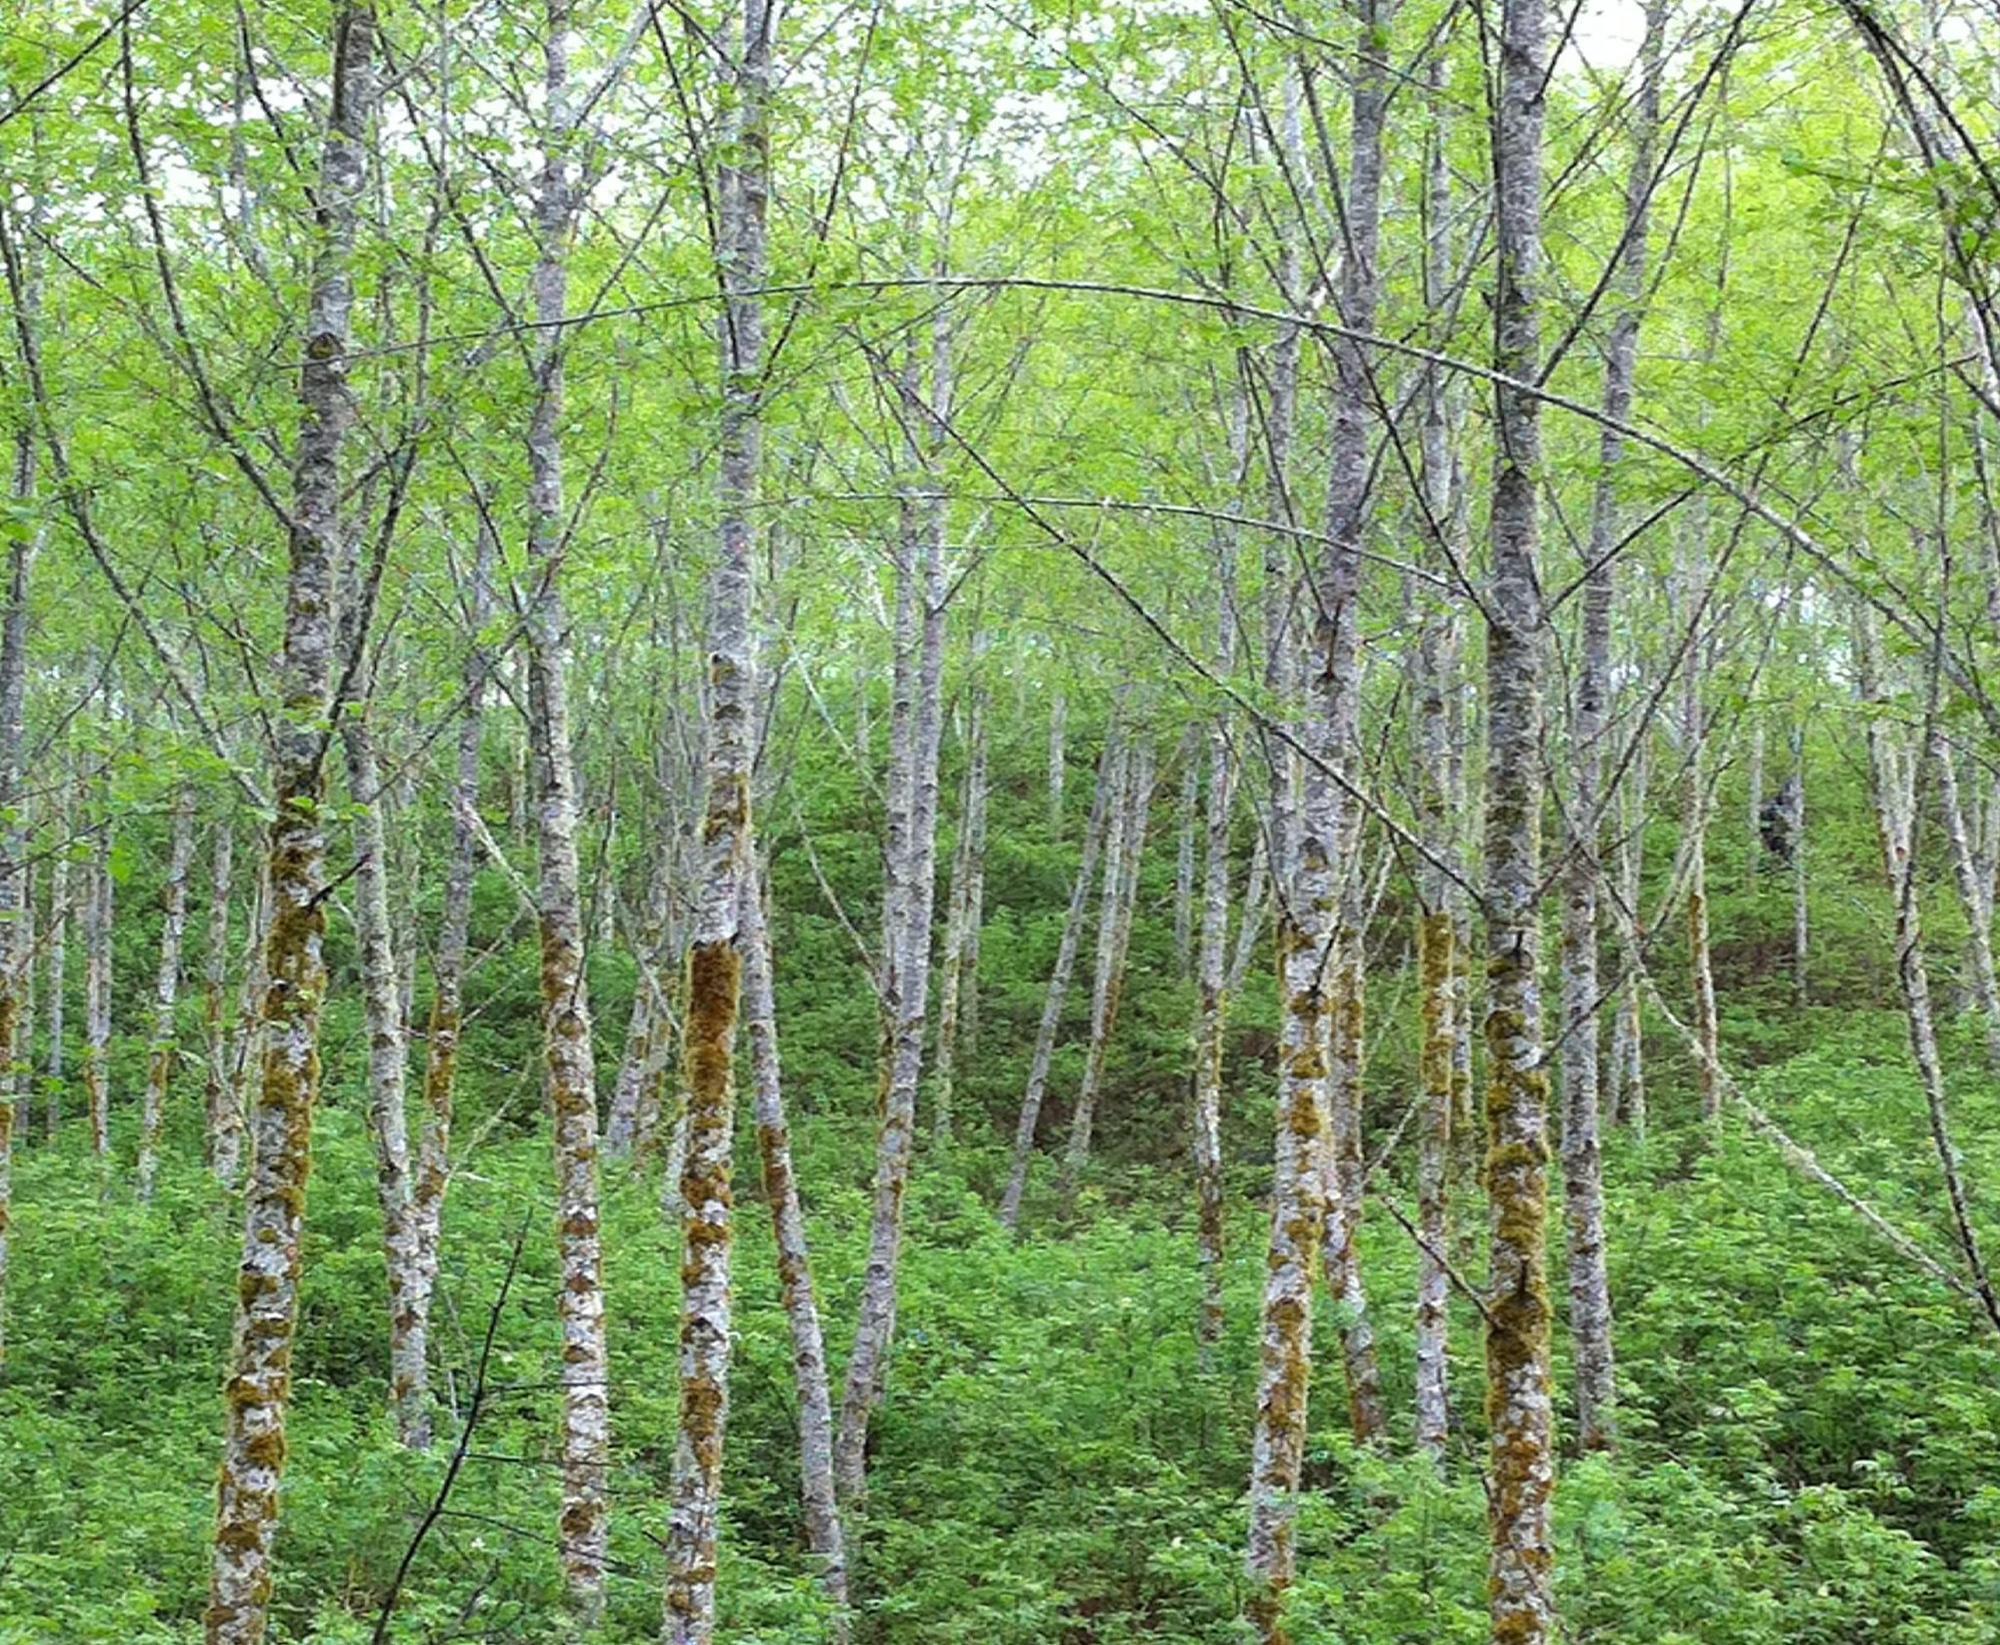 A stand of red alder trees in a forest.